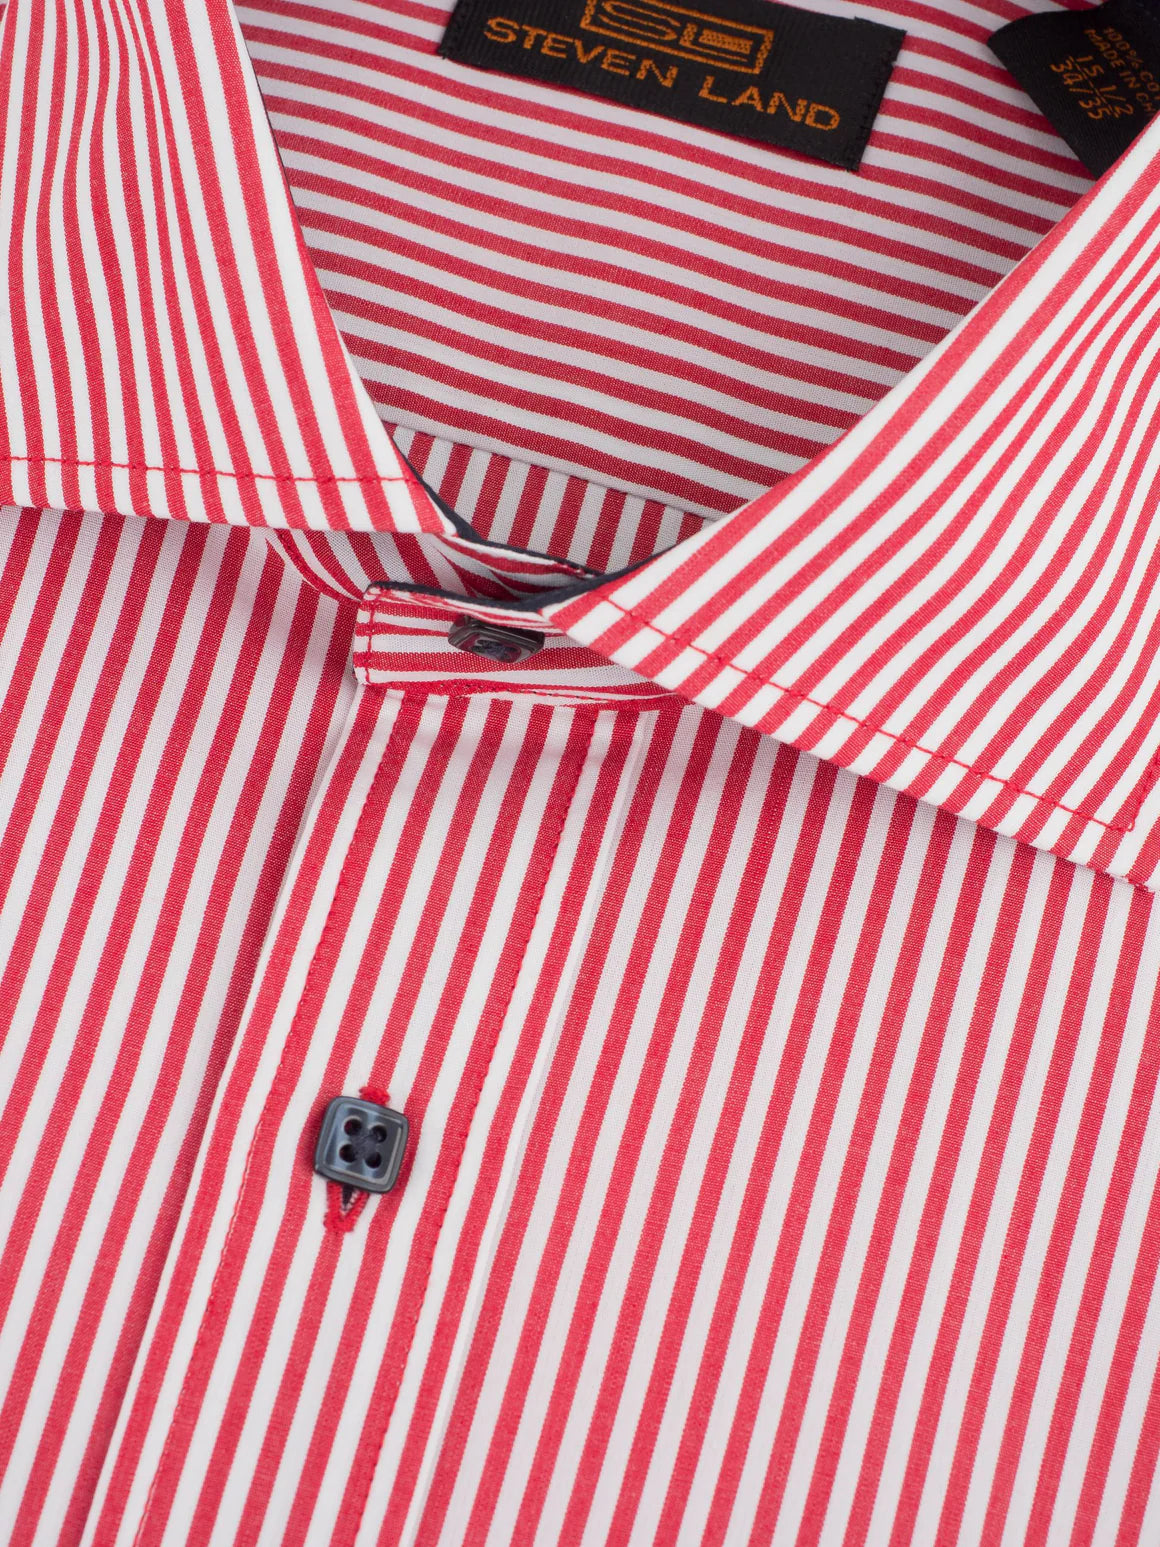 Steven Land Mens Classic Fit Red &amp; White Striped 100% Cotton Dress Shirt